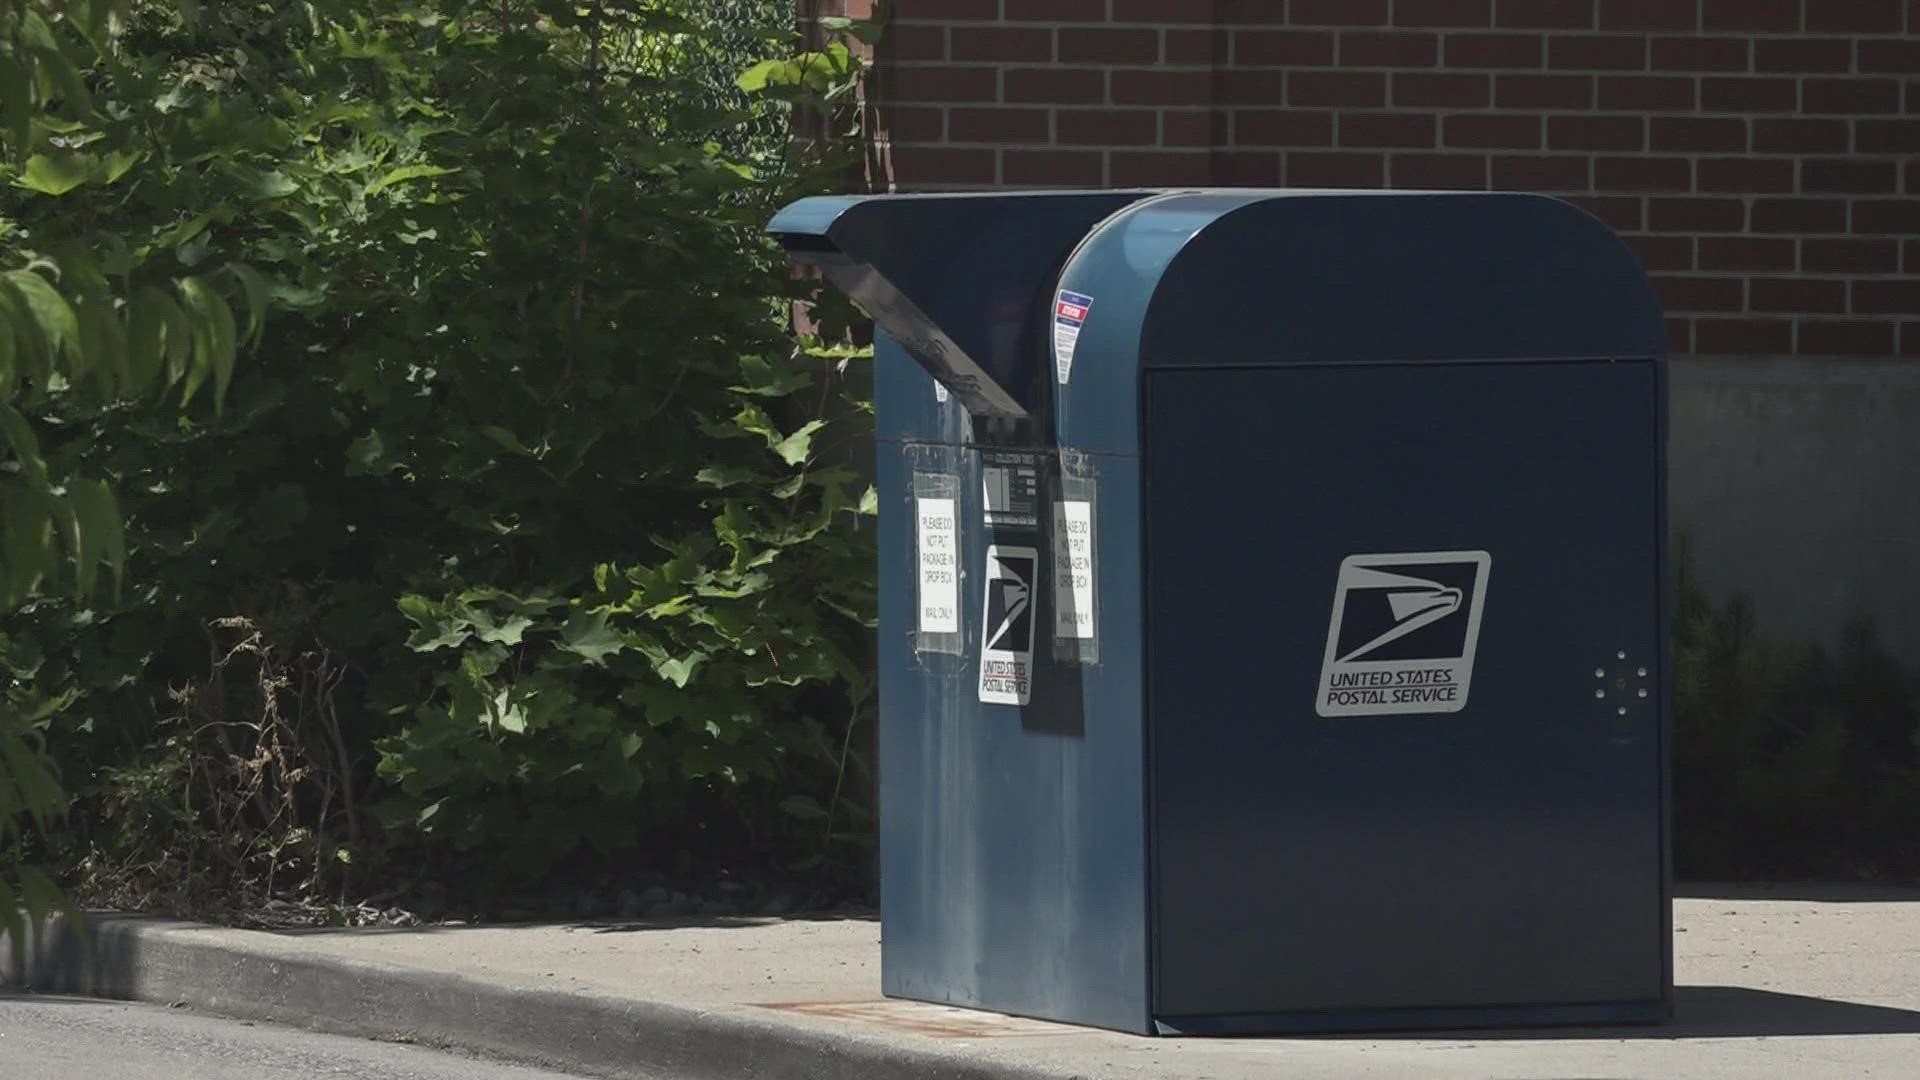 Terri Pederson said she and the rest of her neighborhood didn't get any mail for about a week at the start of July.